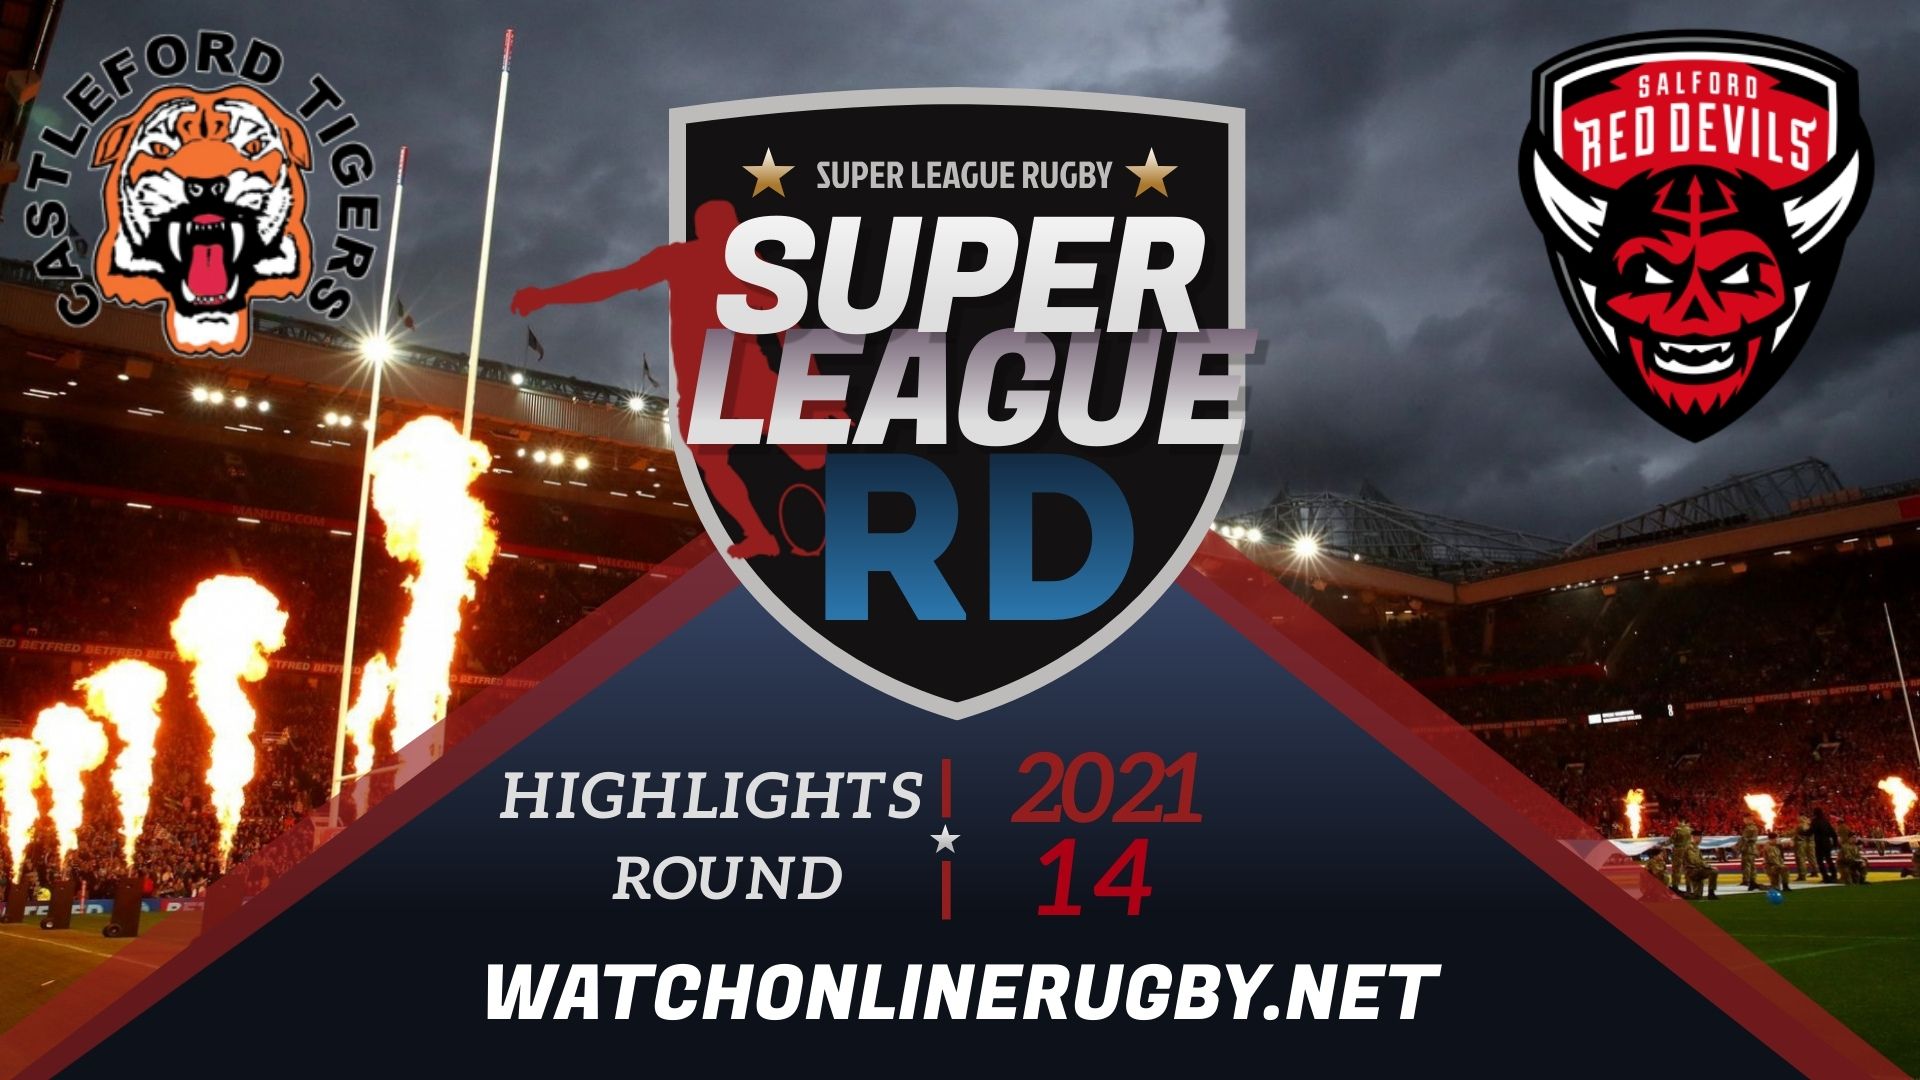 Castleford Tigers Vs Salford Red Devils Super League Rugby 2021 RD 14